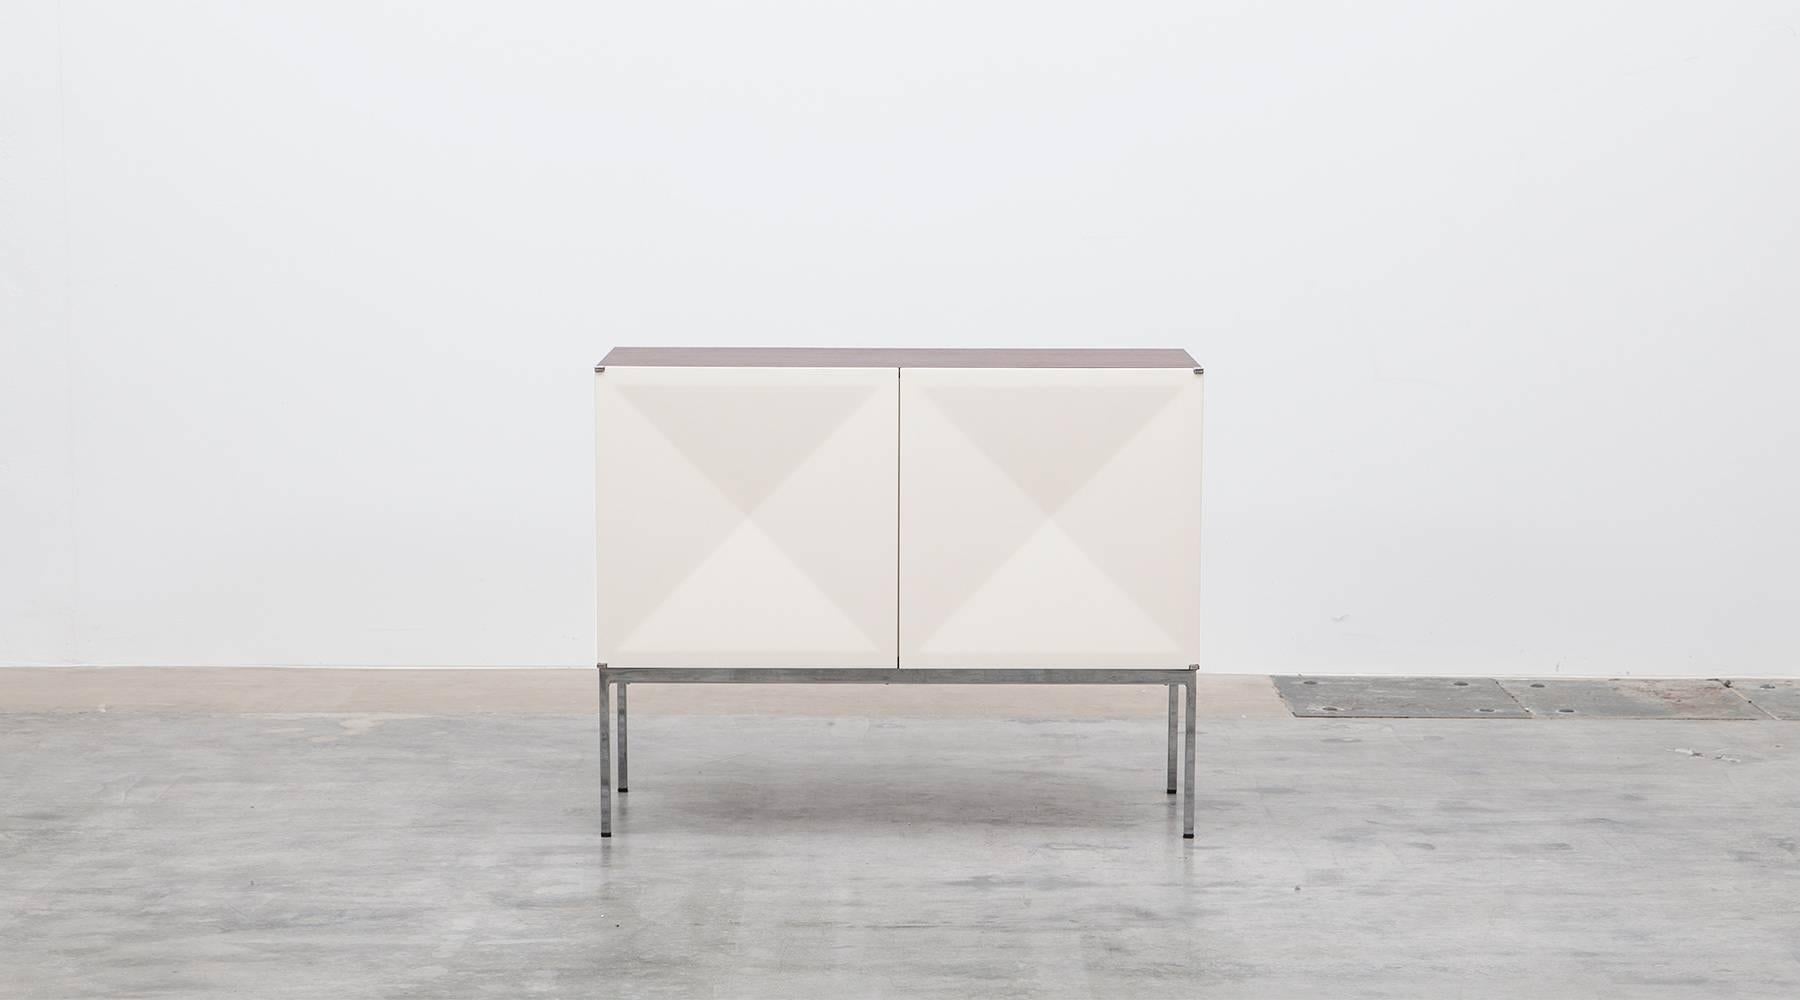 Sideboard with white lacquered diamond shaped doors designed by Antoine Philippon and Jacqueline Lecoq. The corpus is mahogany, the inlay in maple features a big storage area with shelves on one side and four drawers on the other side. Manufactured